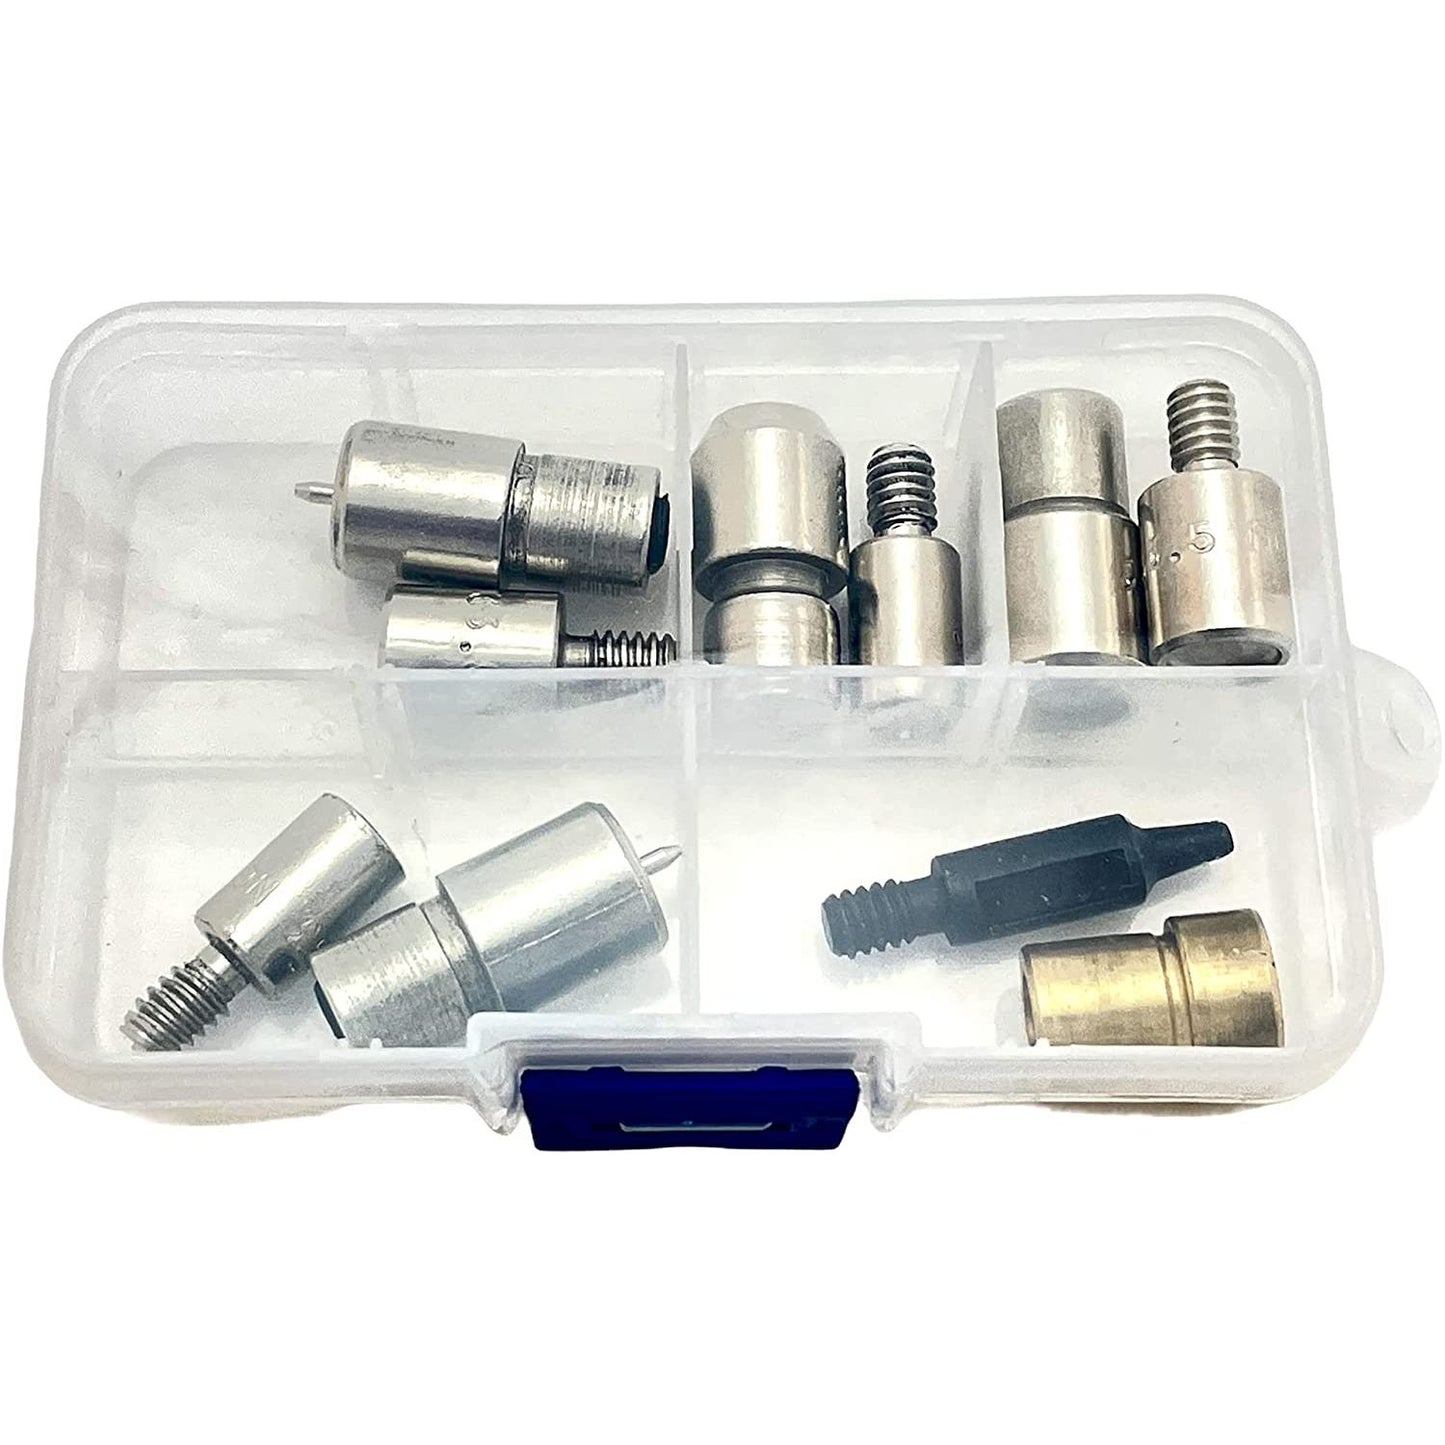 essential rivet setting kit with hand press machine 4 rivet dies and 2 mm hole punch leather rivets single round cap metal stud fasteners for bag belt wallet jeans